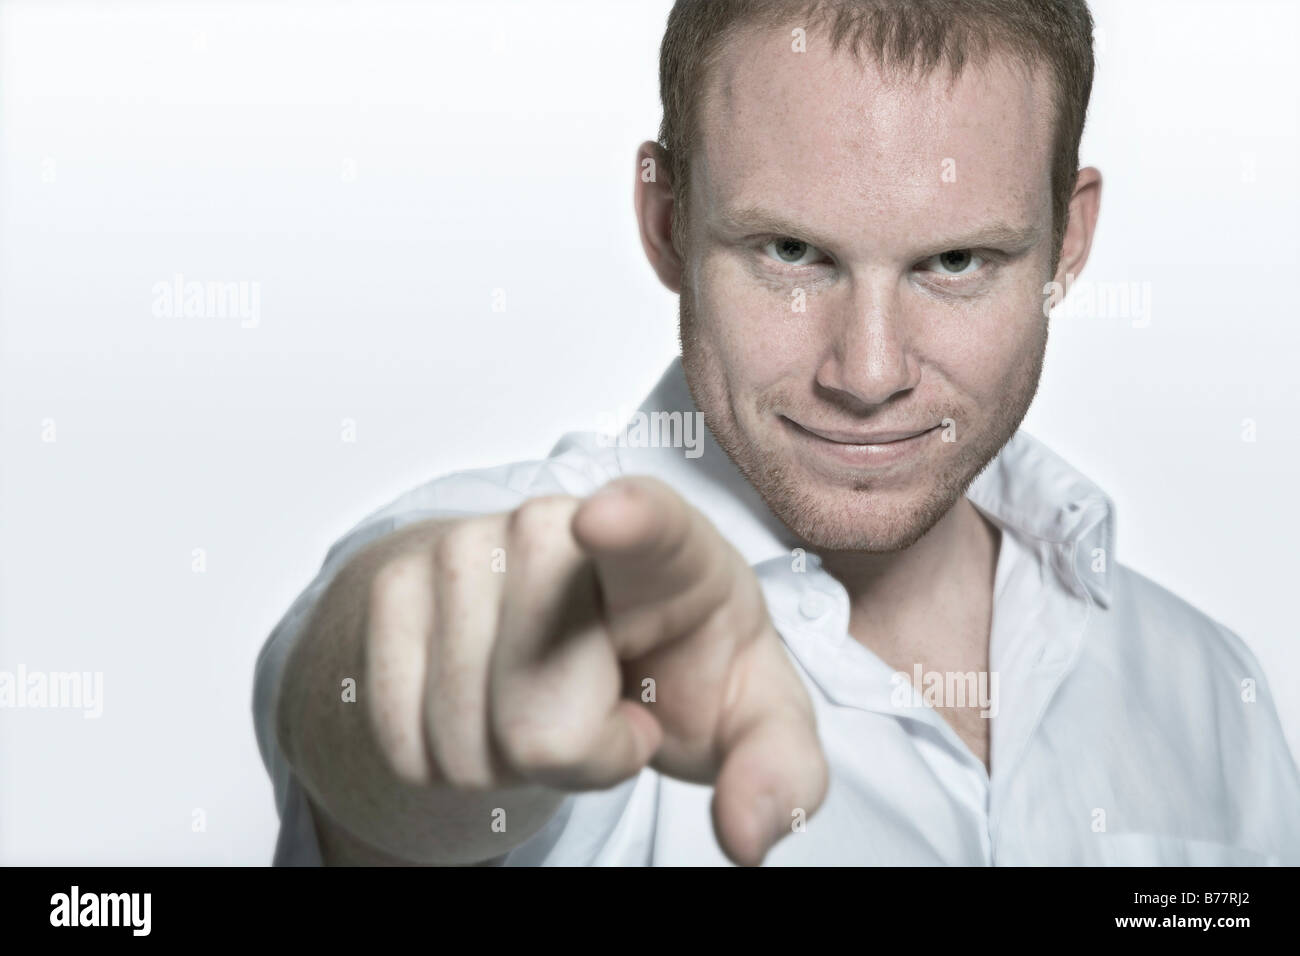 Young man pointing into the camera Stock Photo